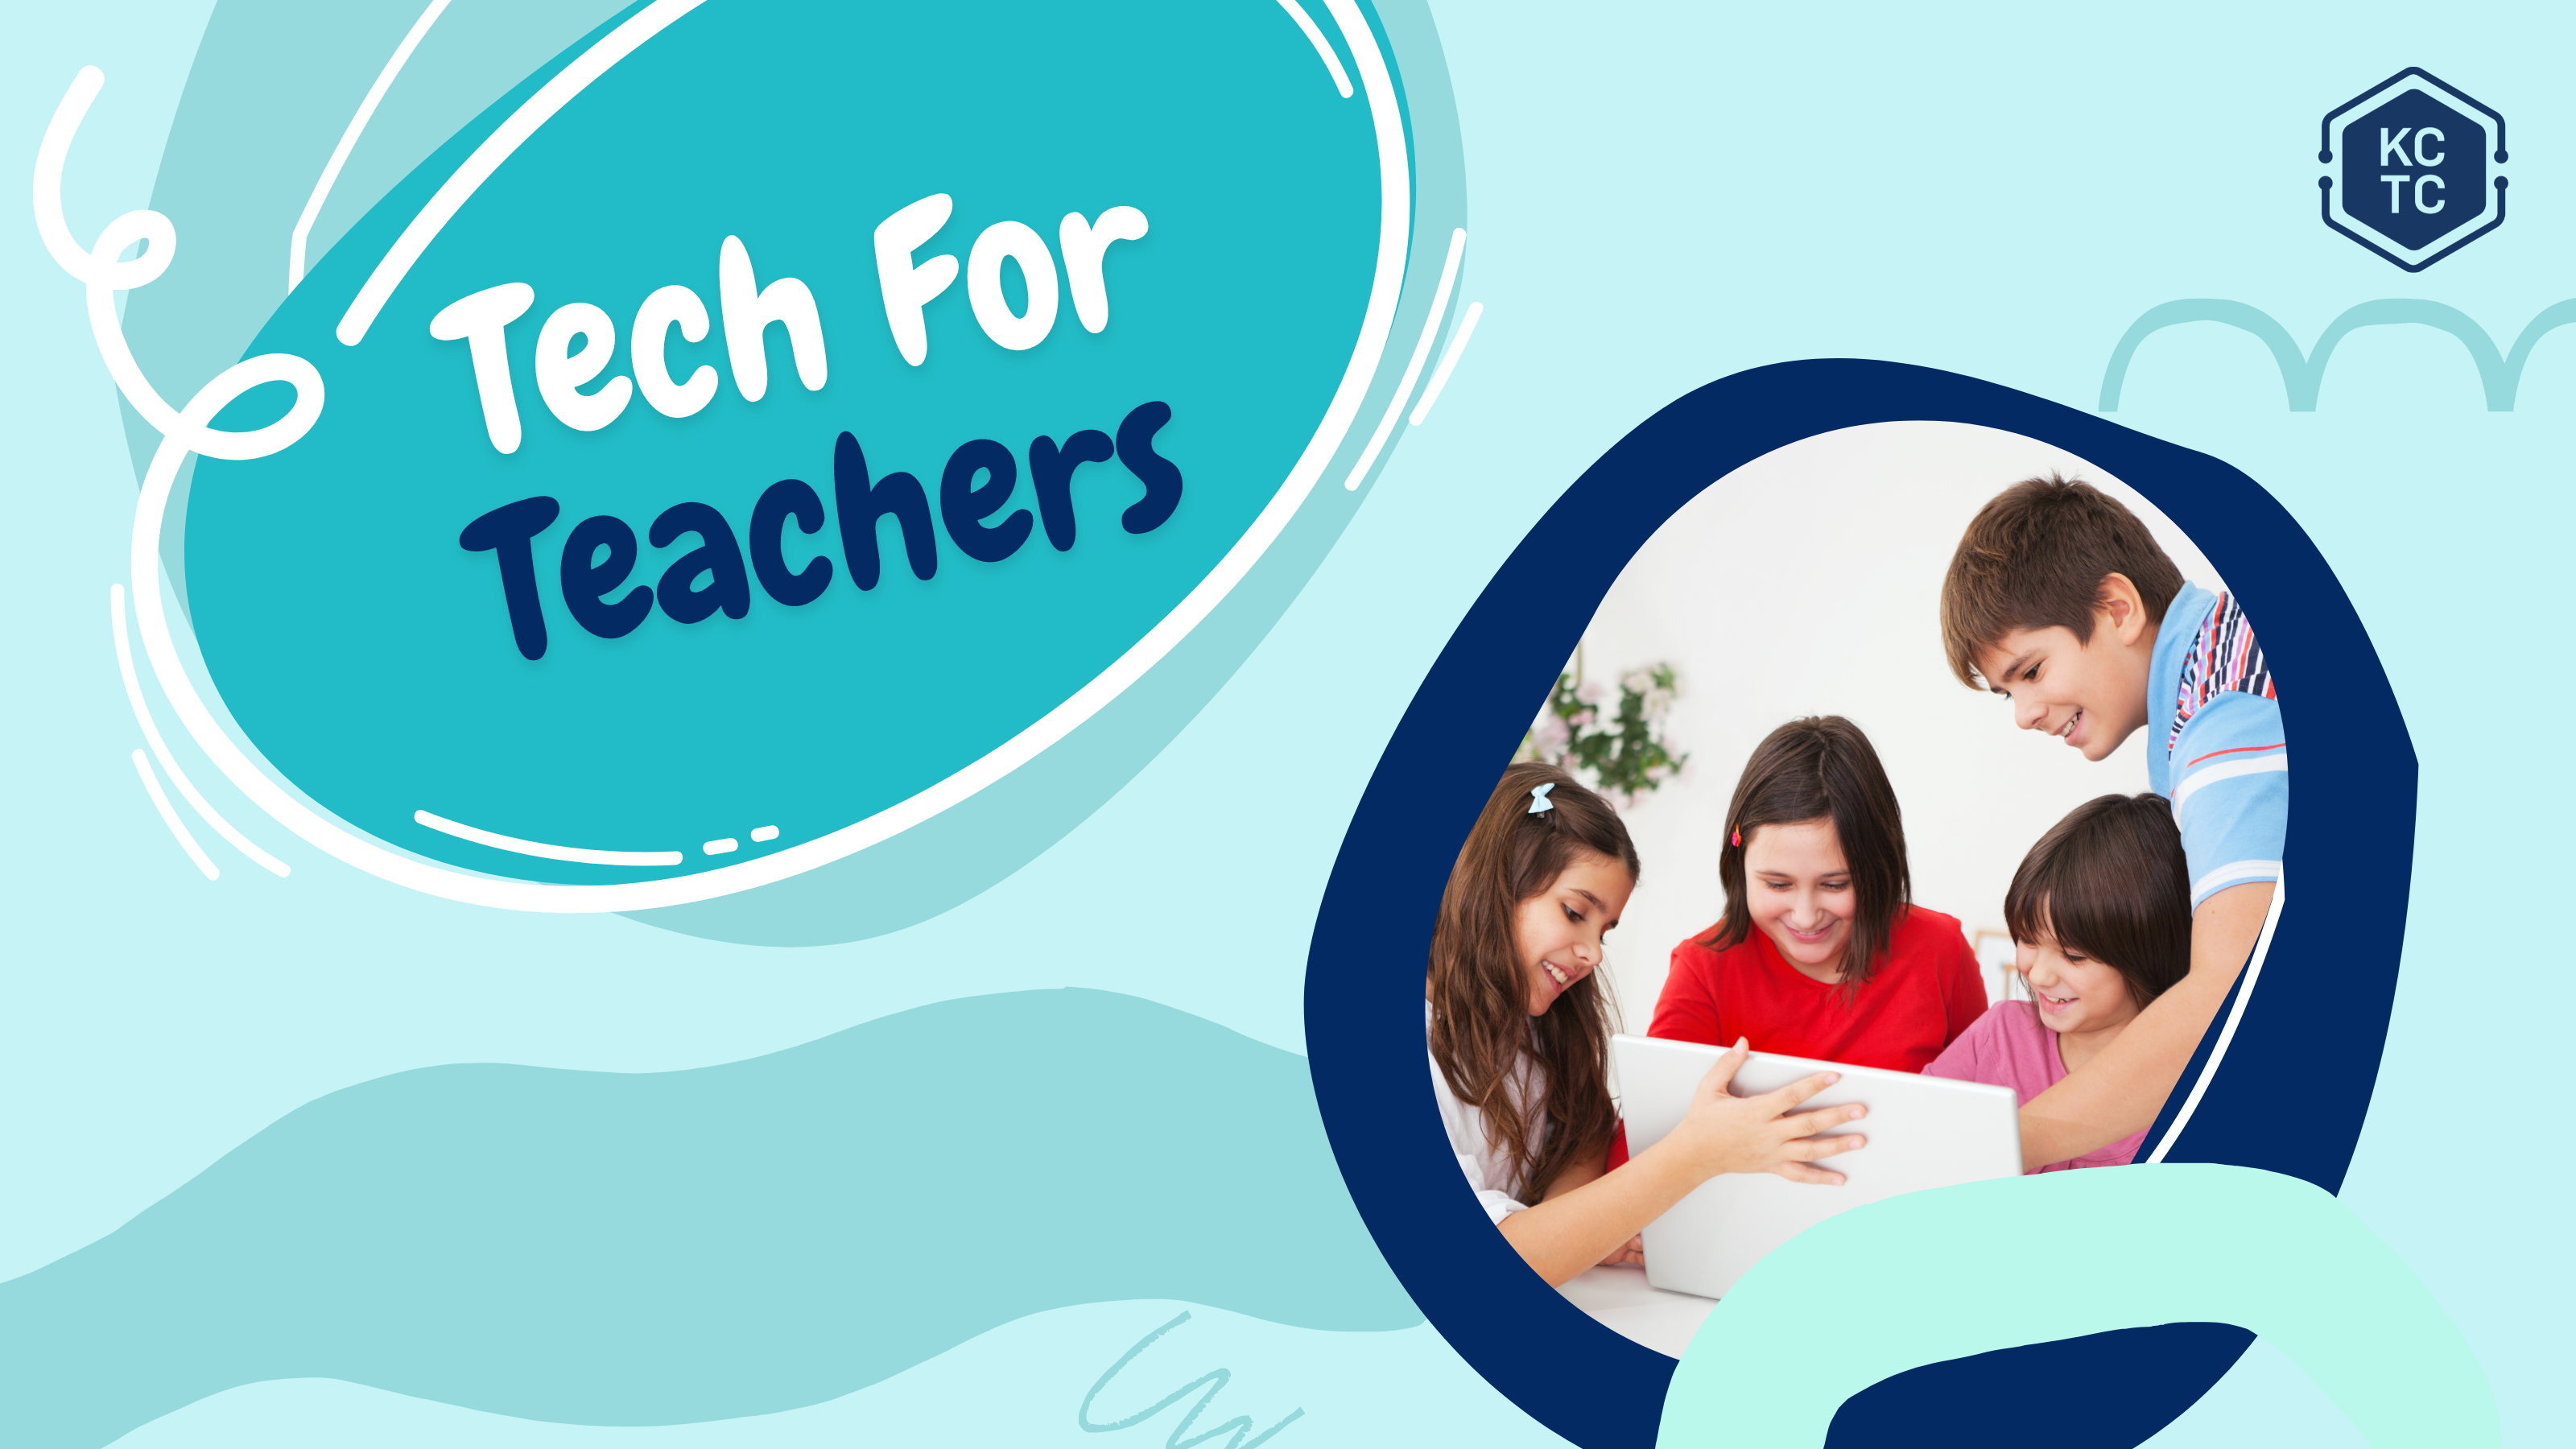 Graphic design reading Tech for Teachers with a photo of three children looking at a laptop computer